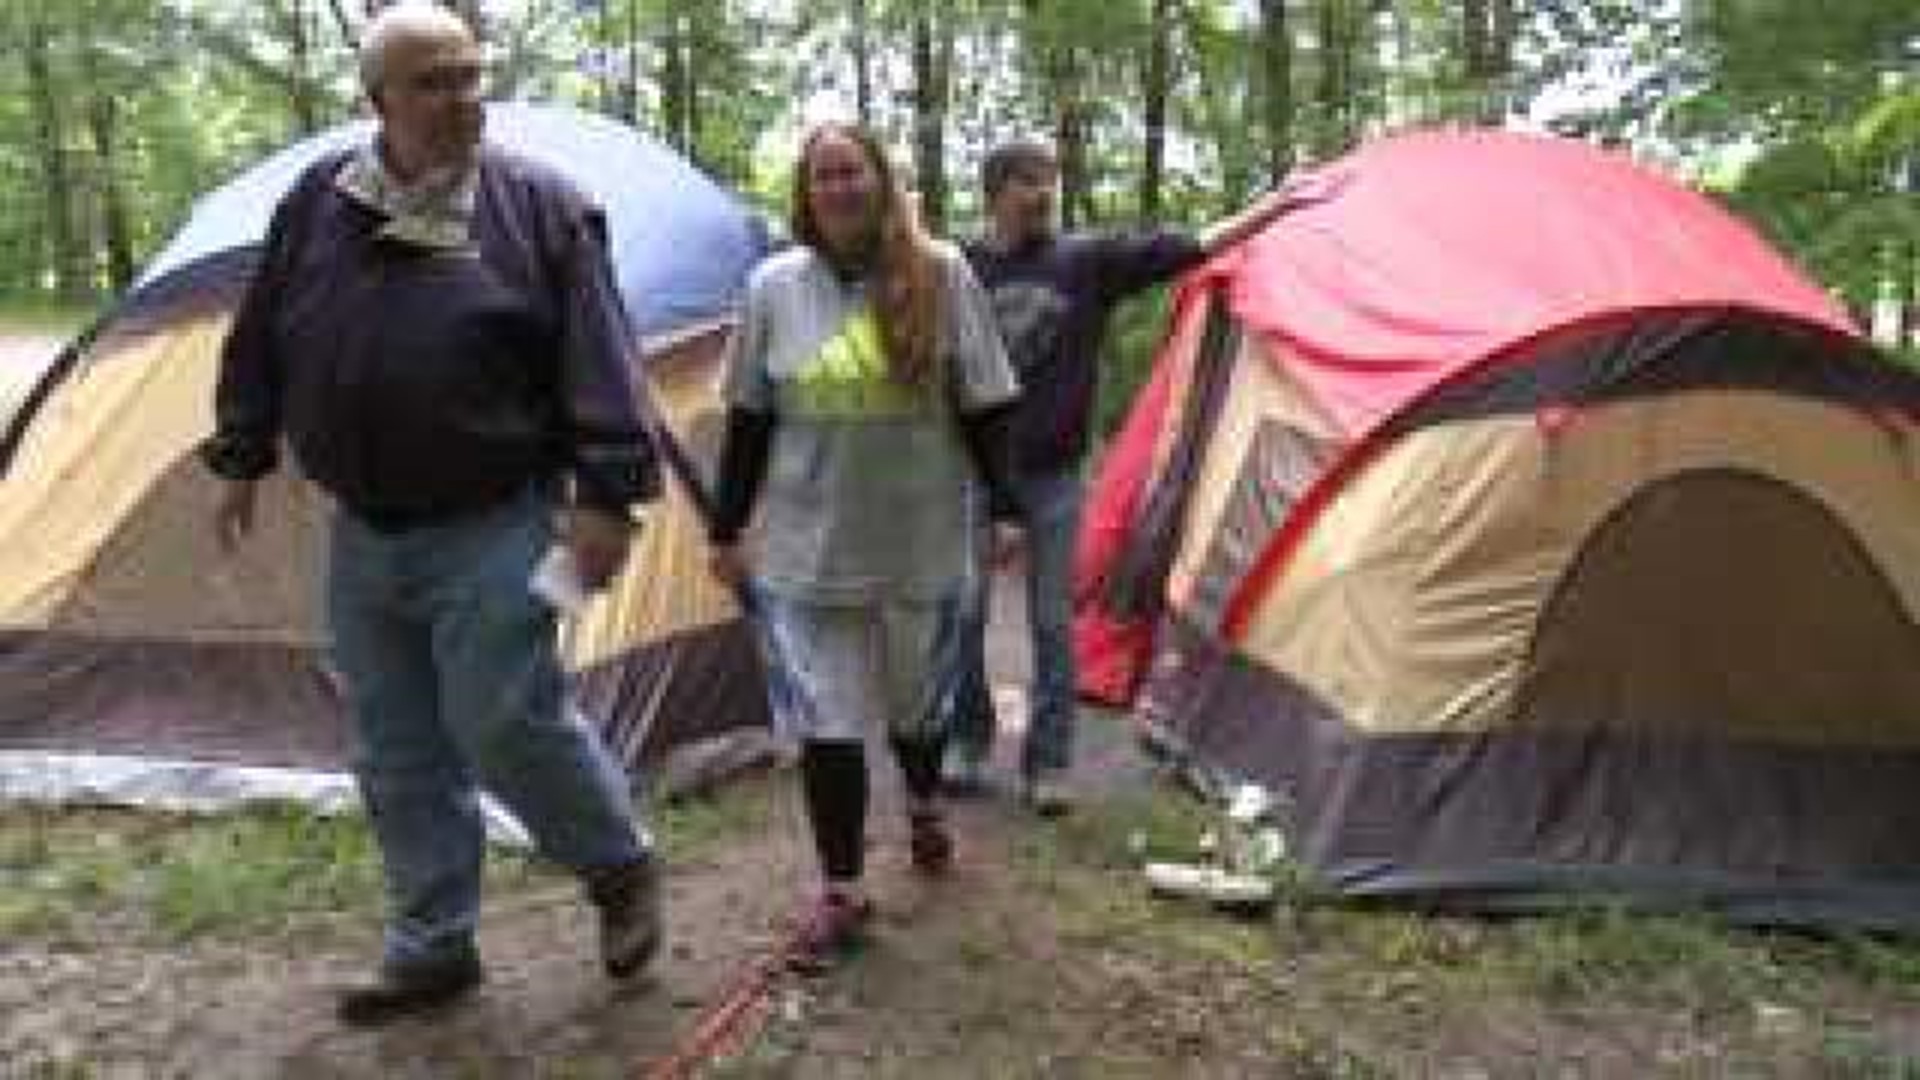 Finding freedom, couple lives out of tent